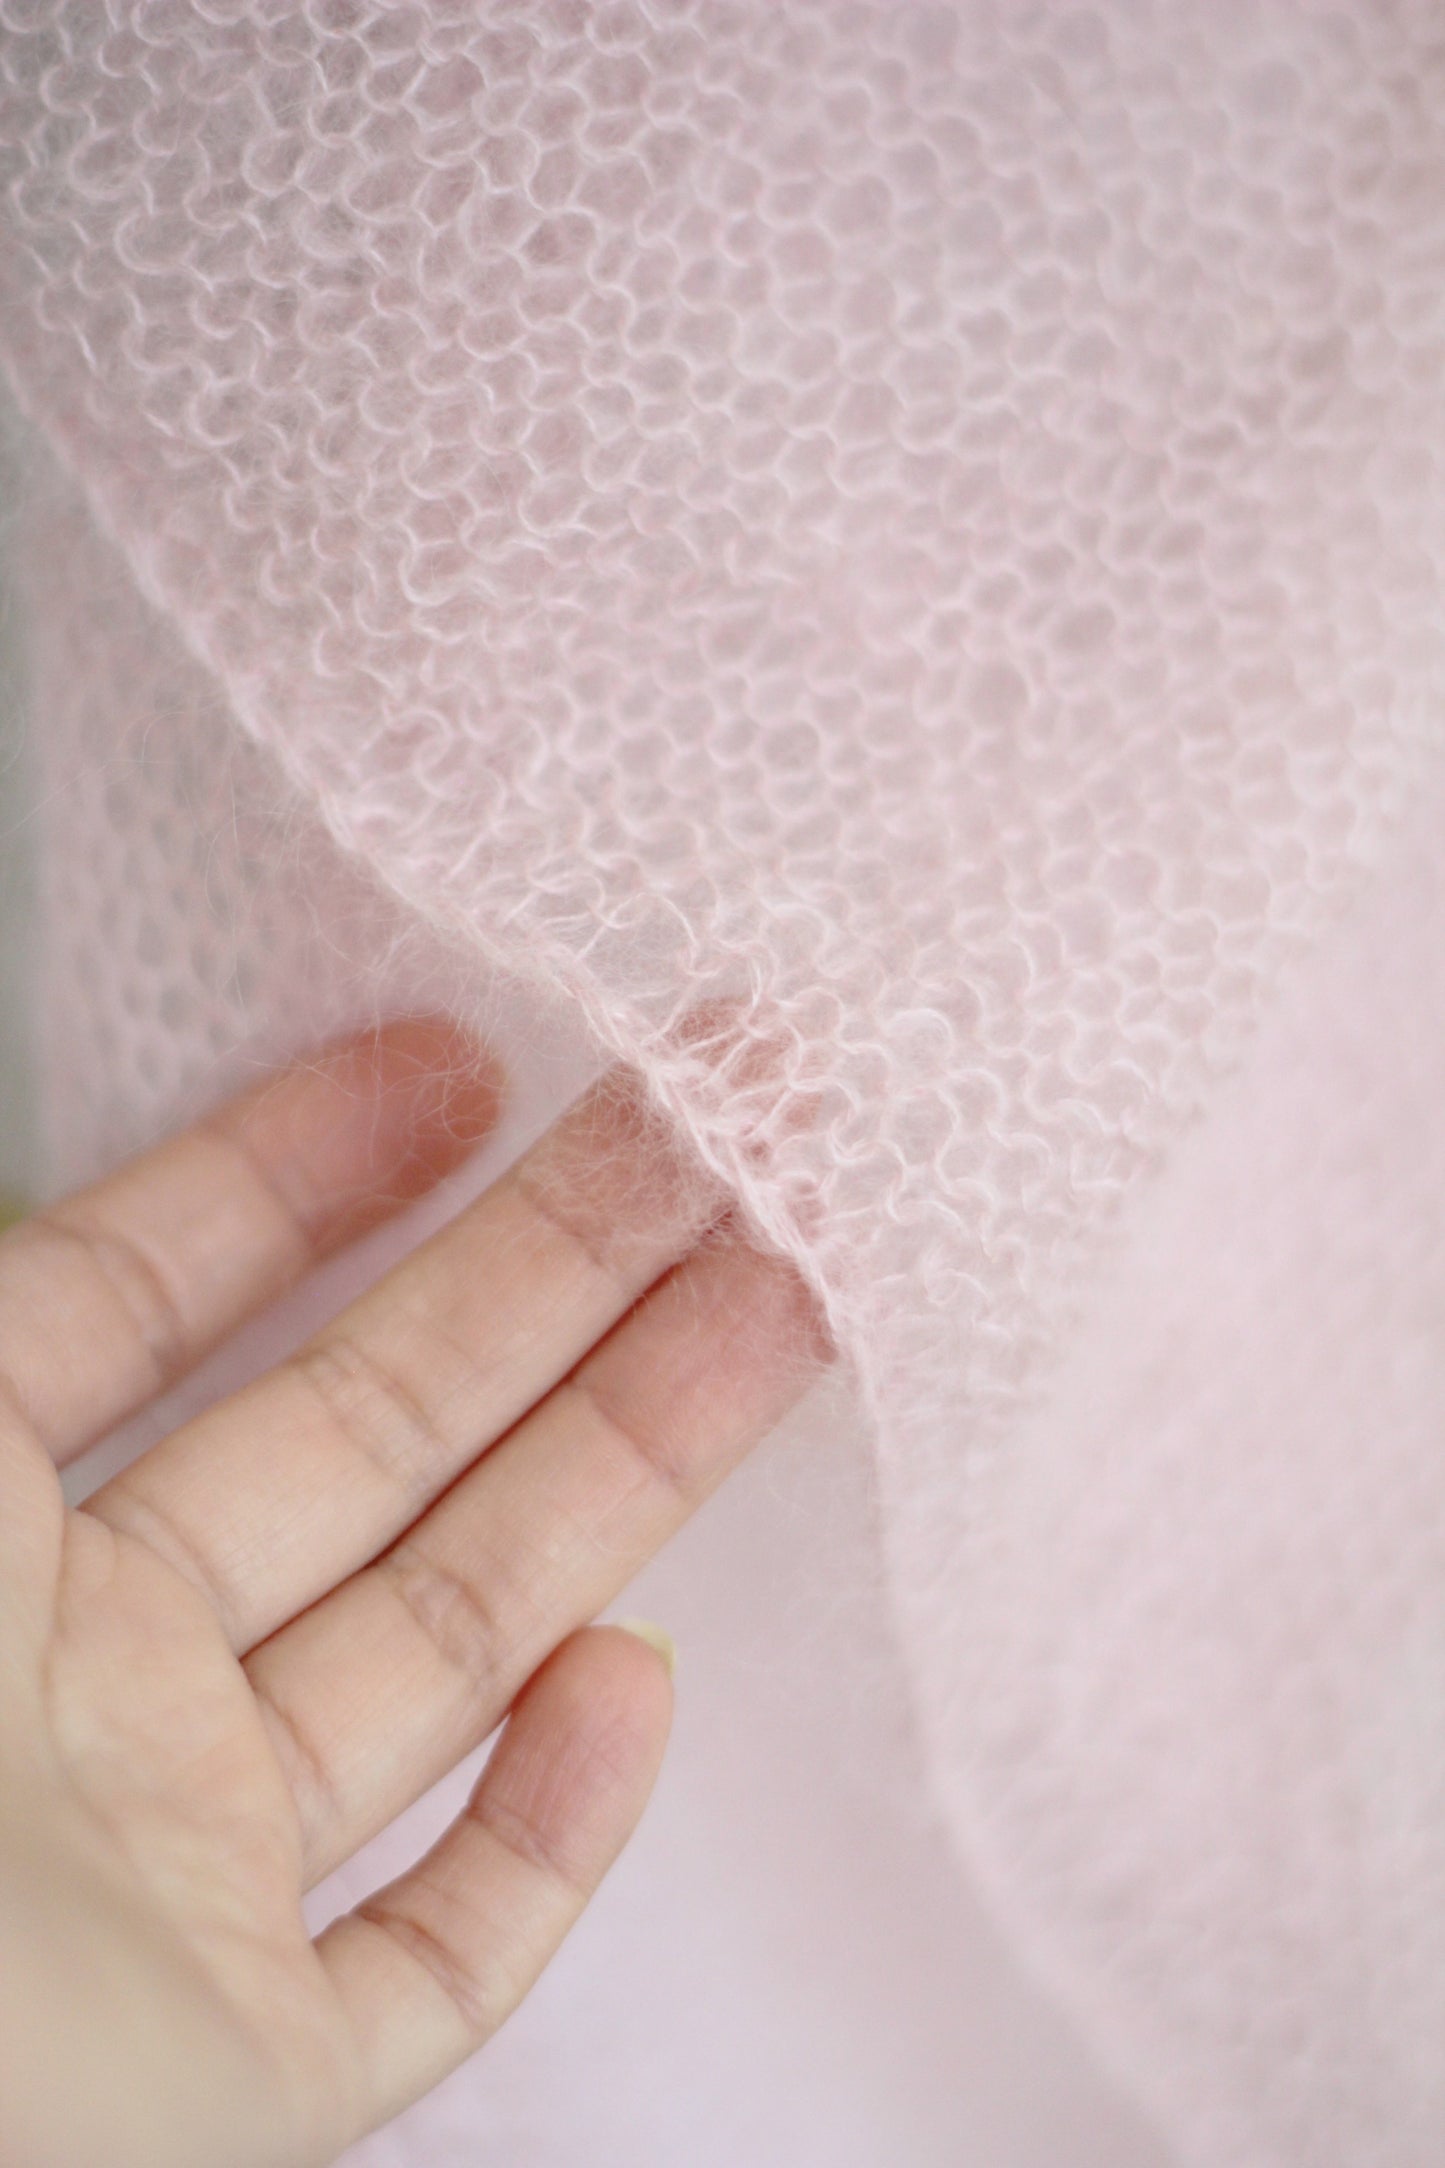 Knit shawl in silk mohair blend in soft pink color